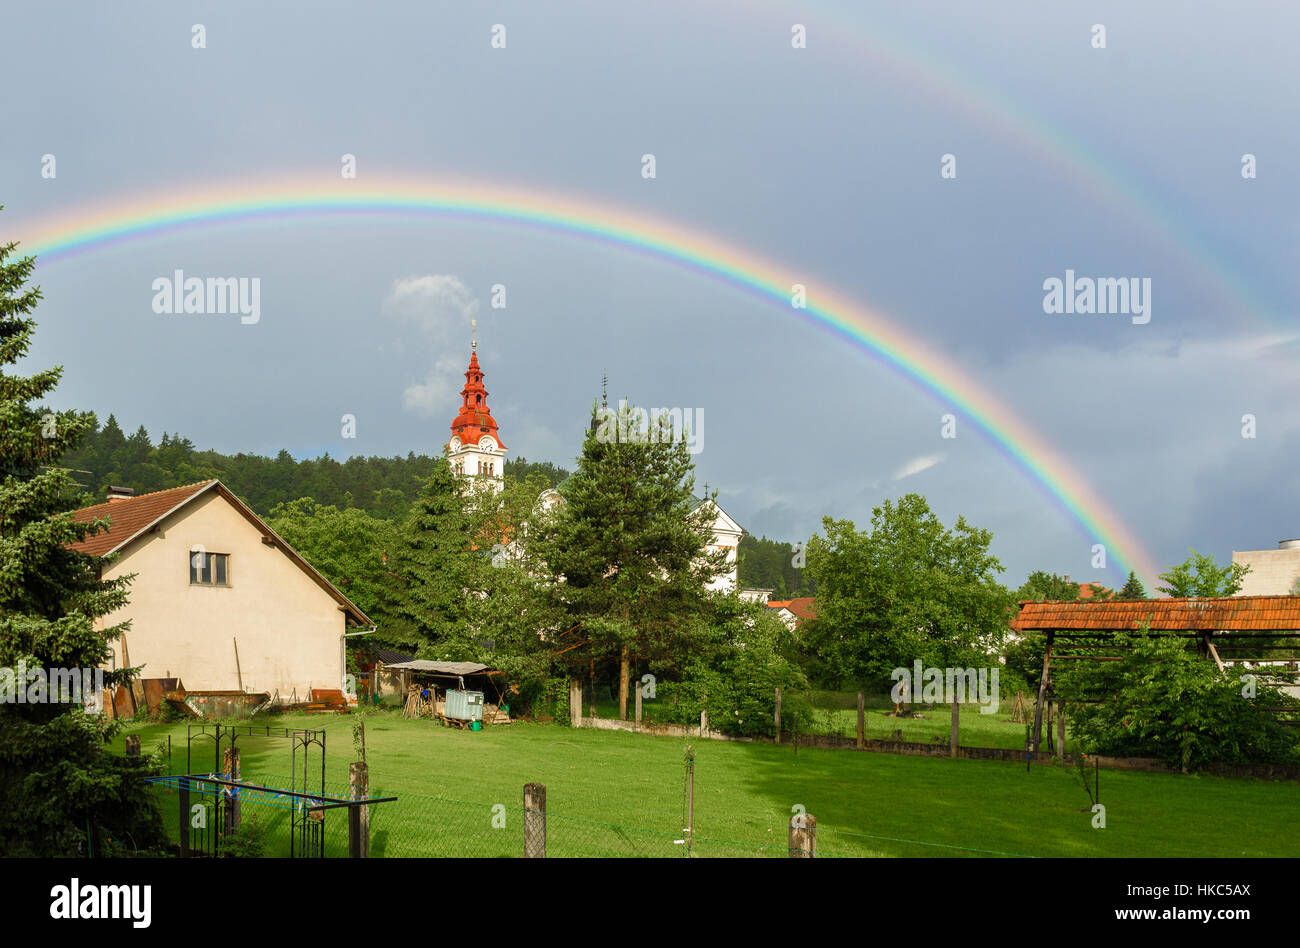 Double rainbow over a church in a cloudy village. Traditional farm with church in a village and double rainbow over woods and trees Stock Photo